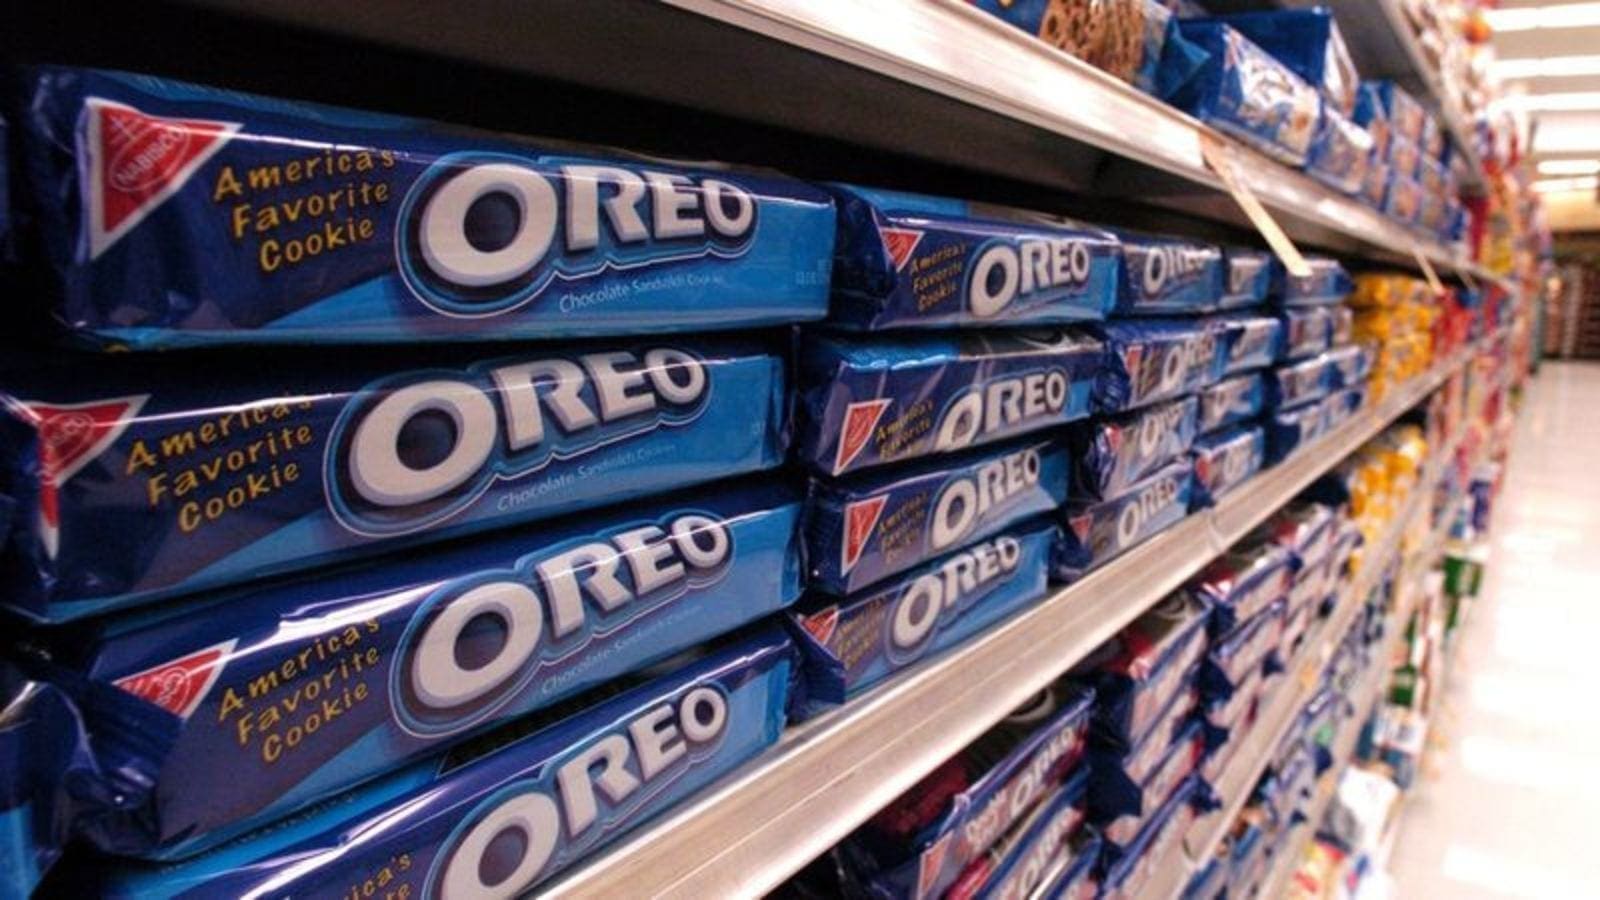 Mondelez considers closing bakery plants in the US that are no longer geographically strategic